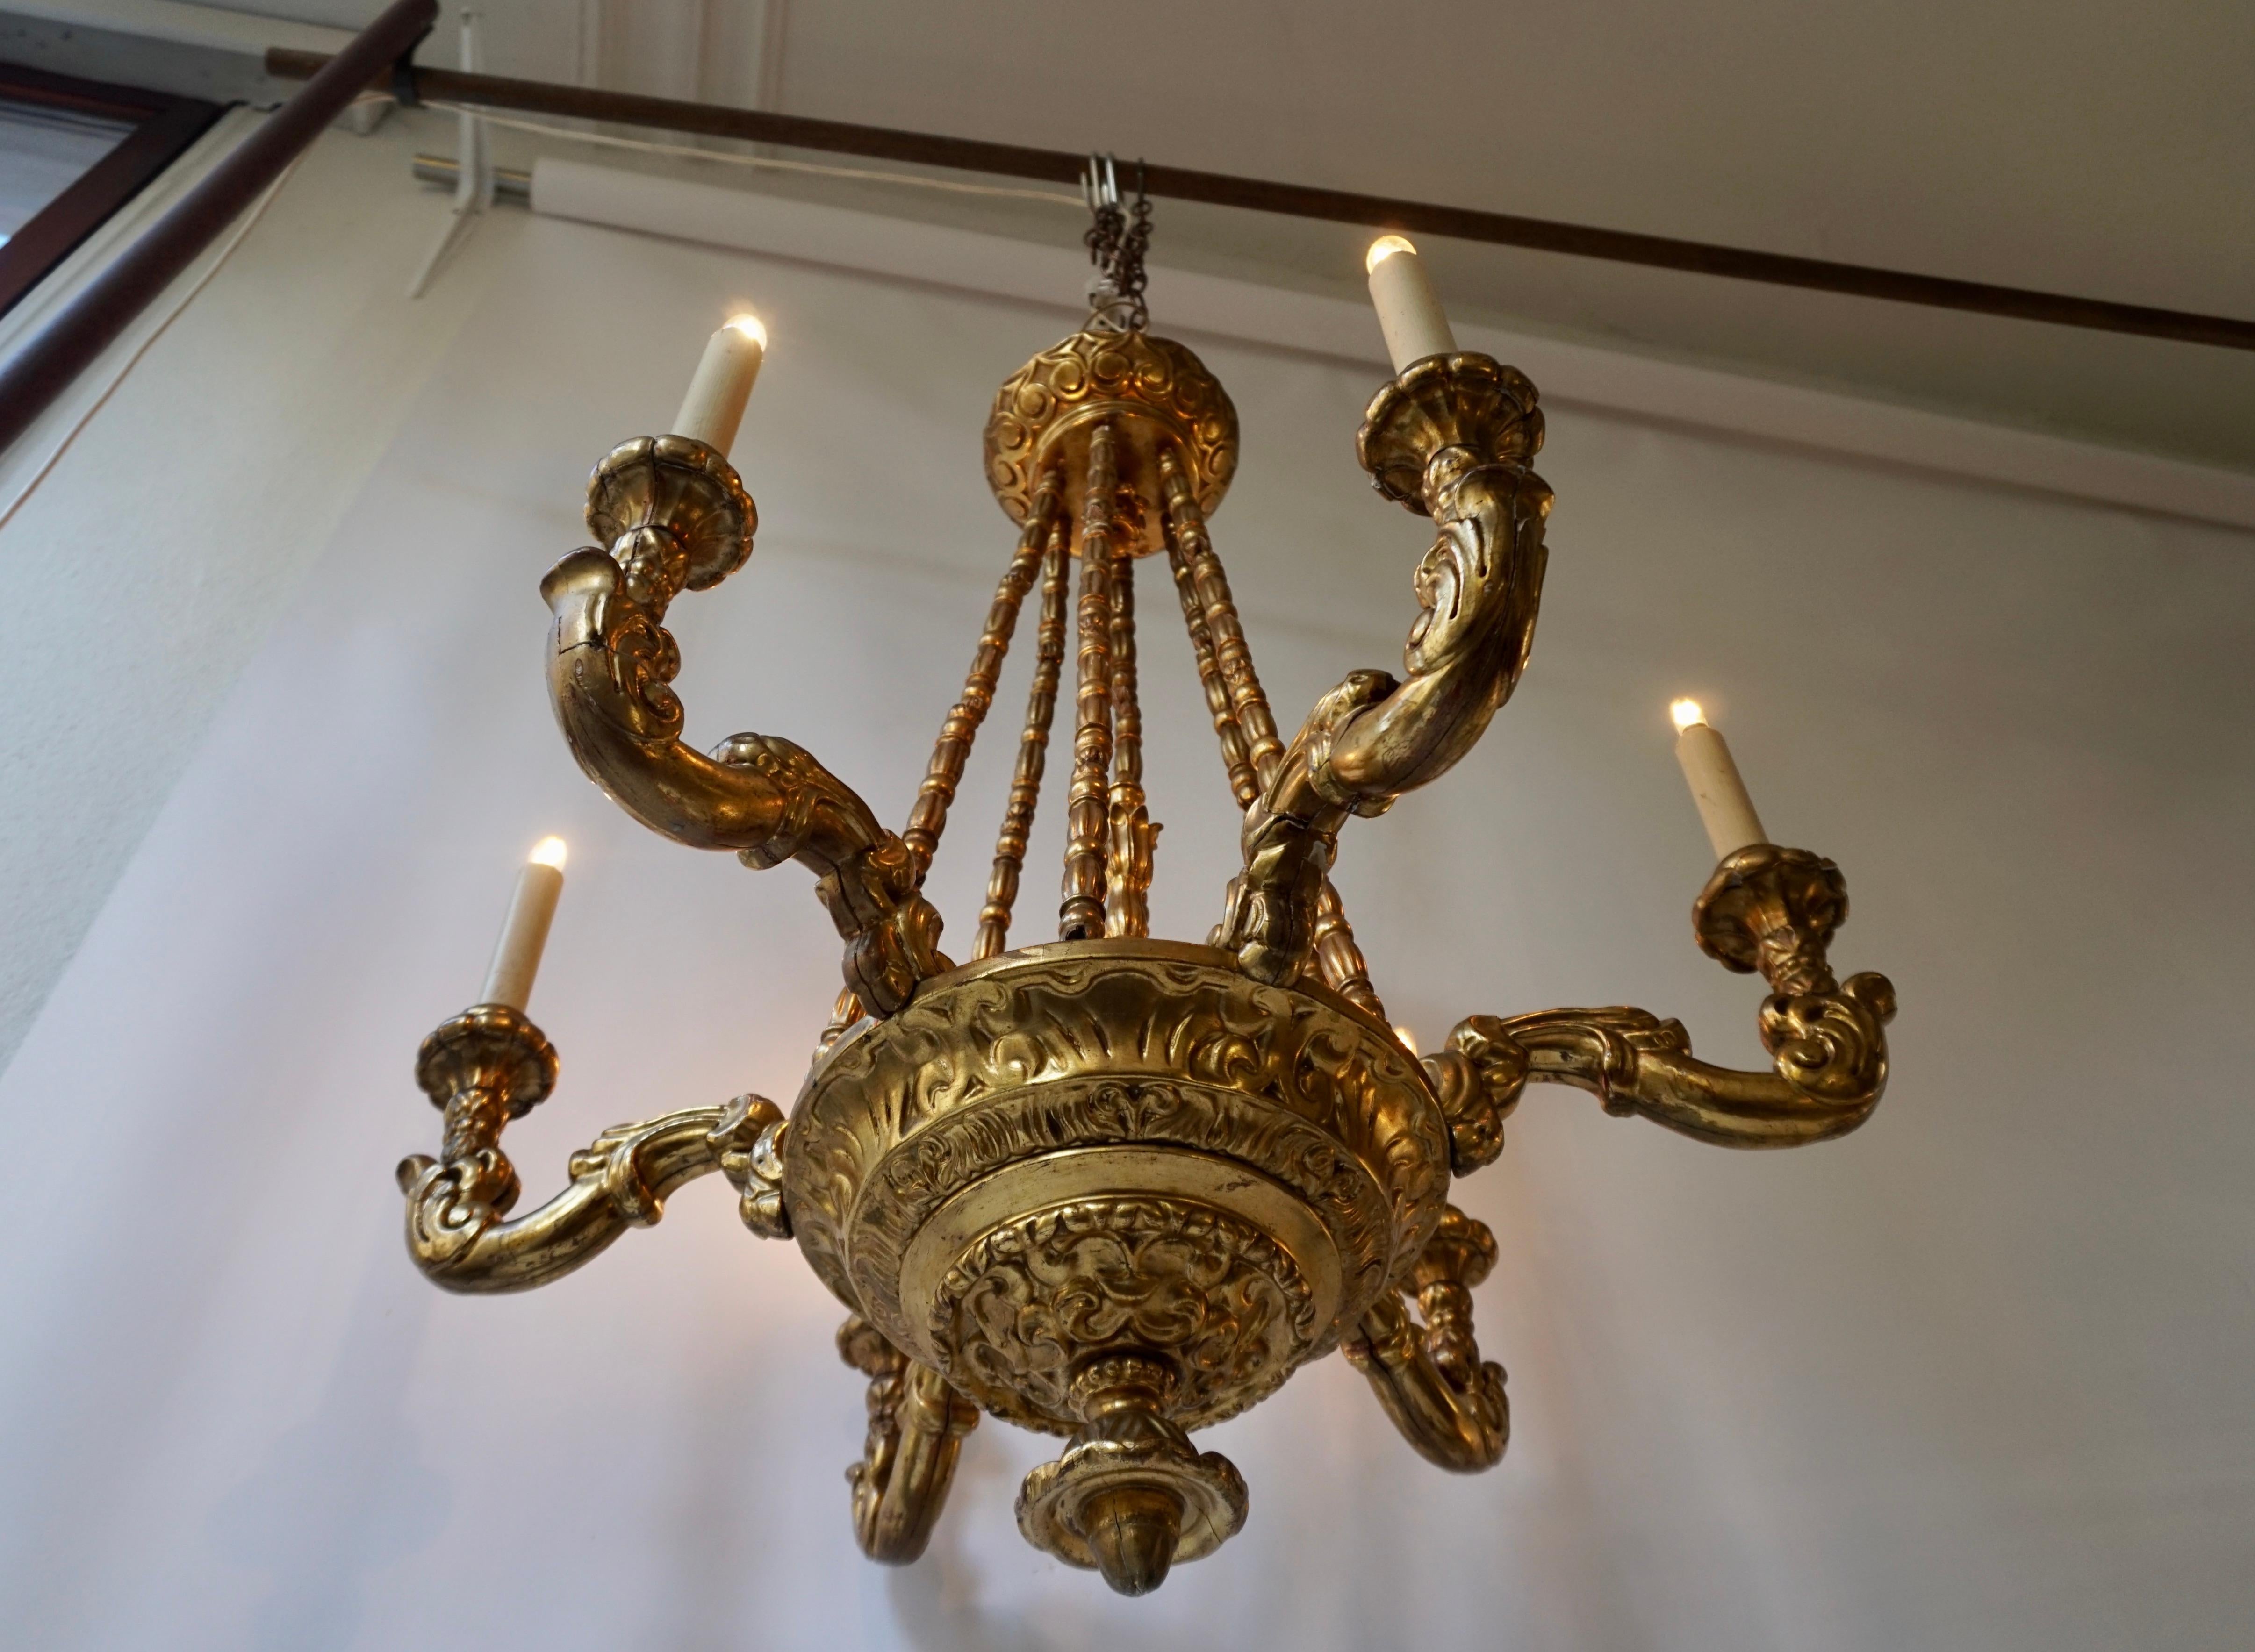 A highly decorative and elegant giltwood, metal and stucco 6-light electrified chandelier.
Italy, mid-20th century, (1920s-1950s).

The light requires six single E14 screw fit lightbulbs (60Watt max.) LED compatible.
Measures: Diameter 75